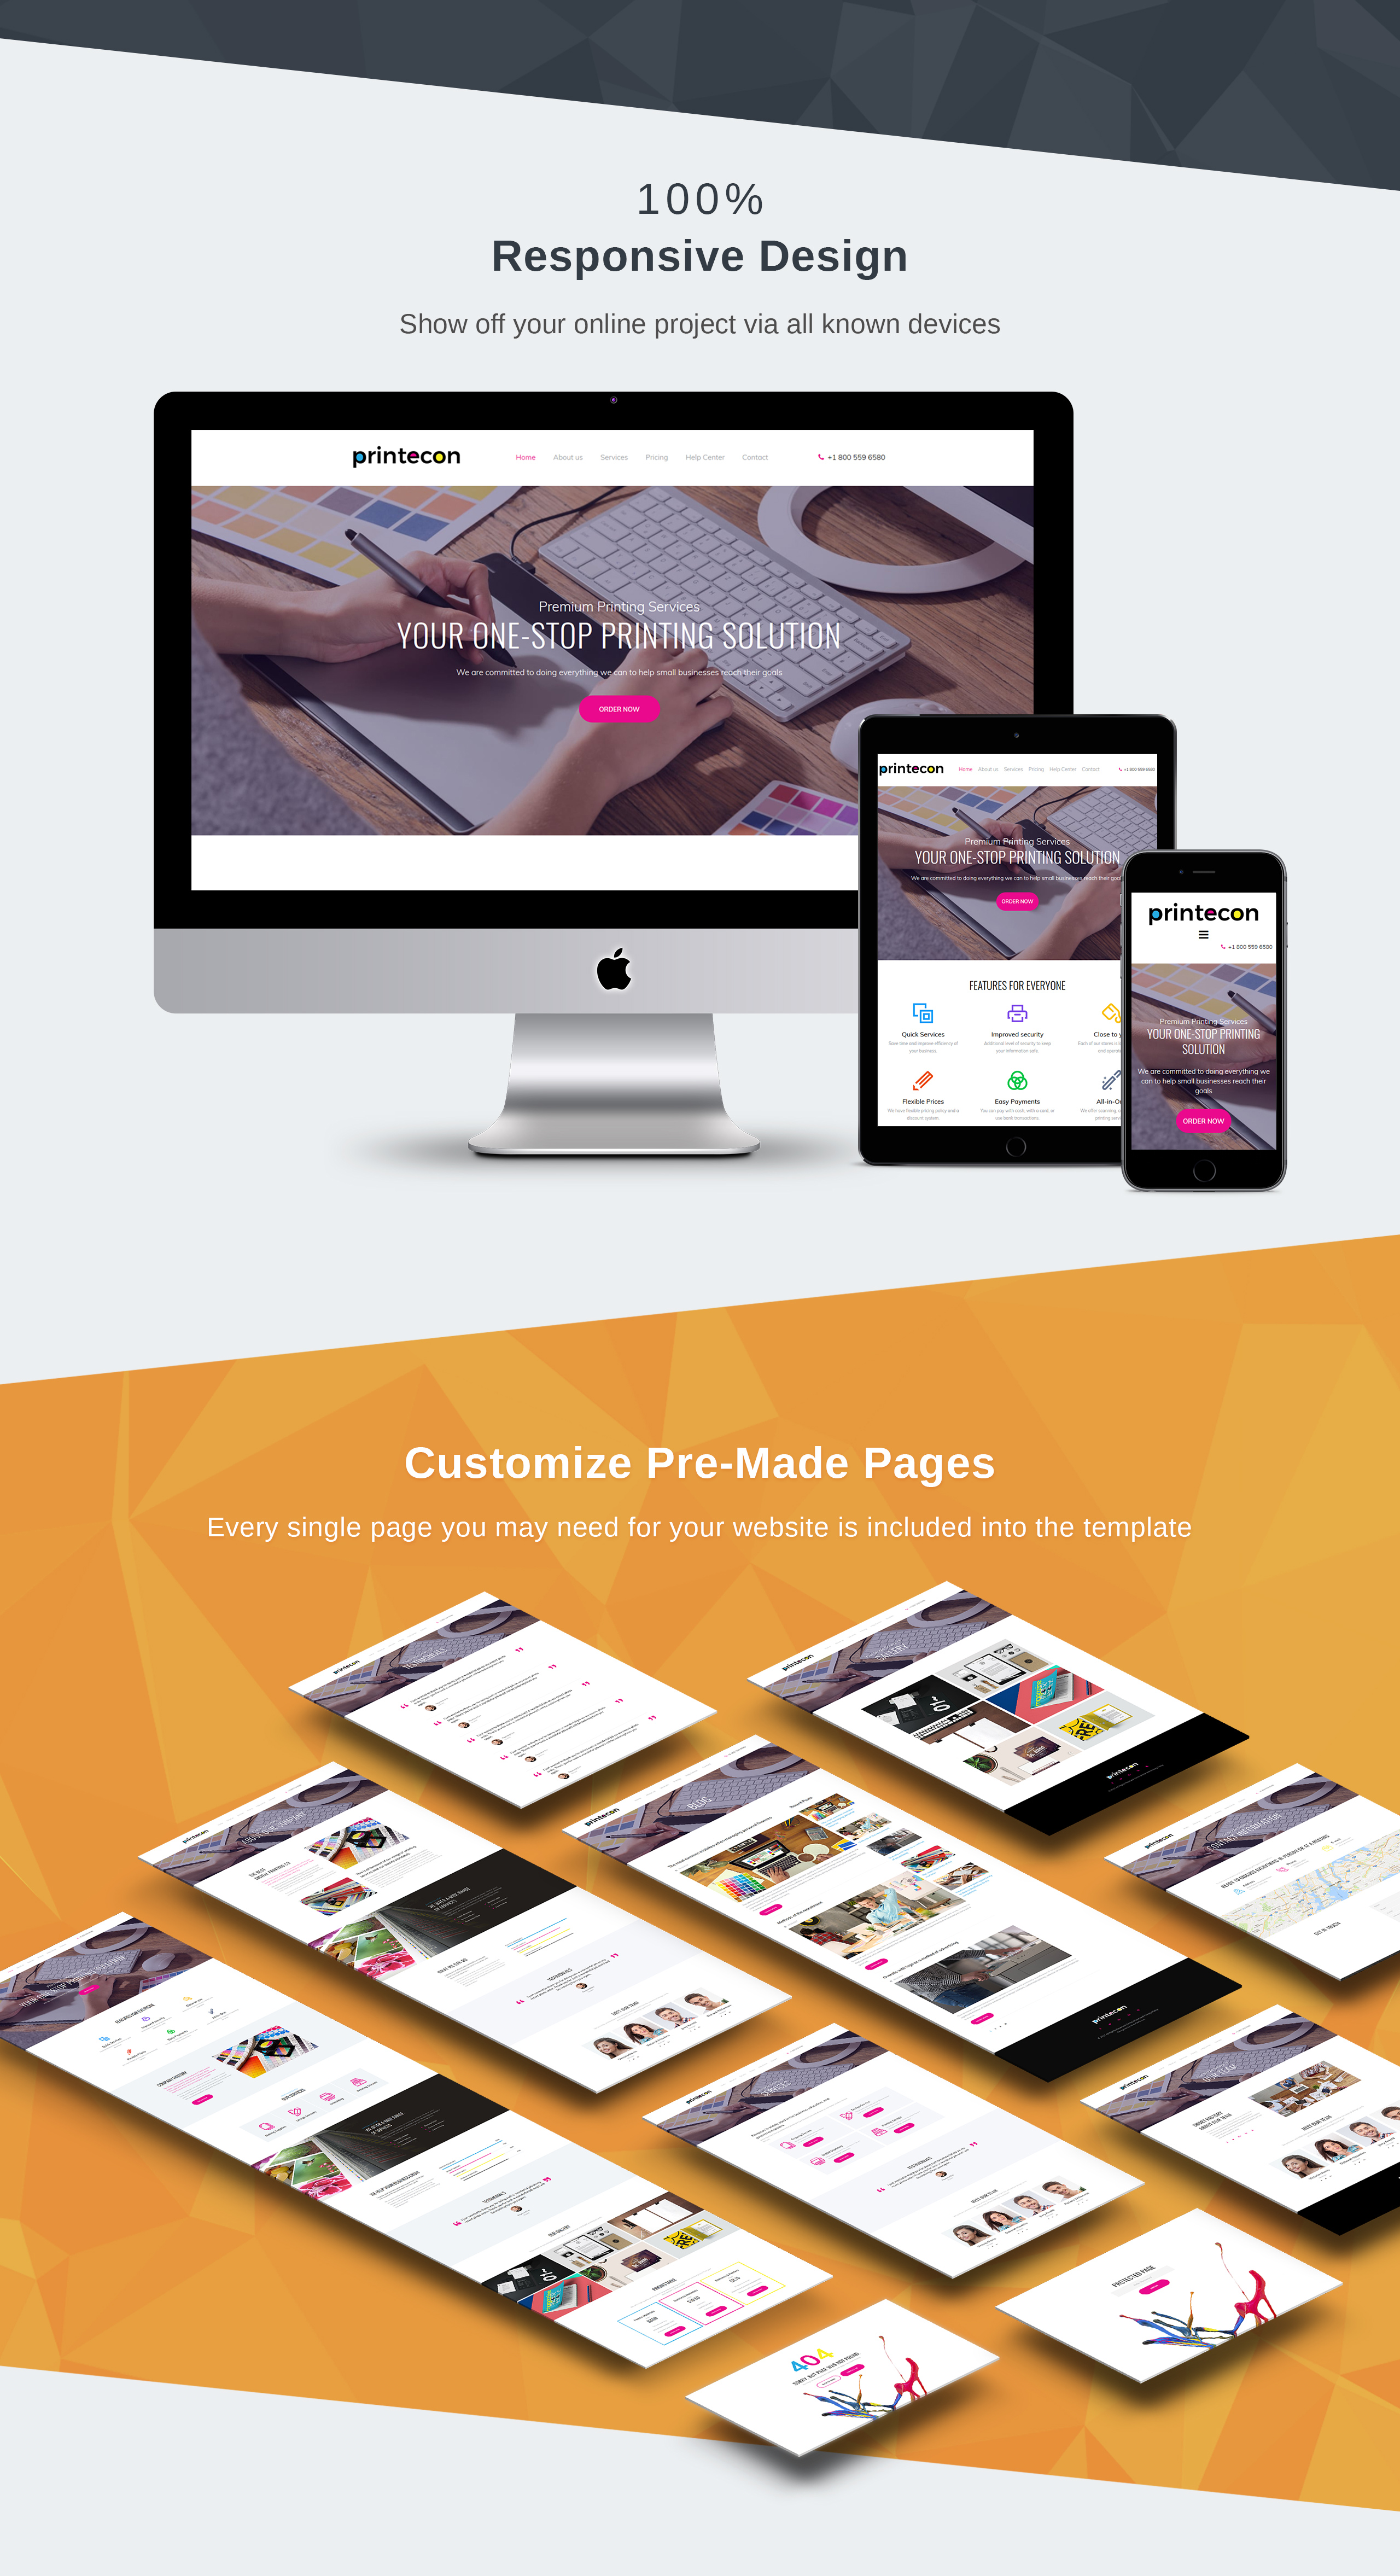 Printing Company Website Template for Print Services MotoCMS